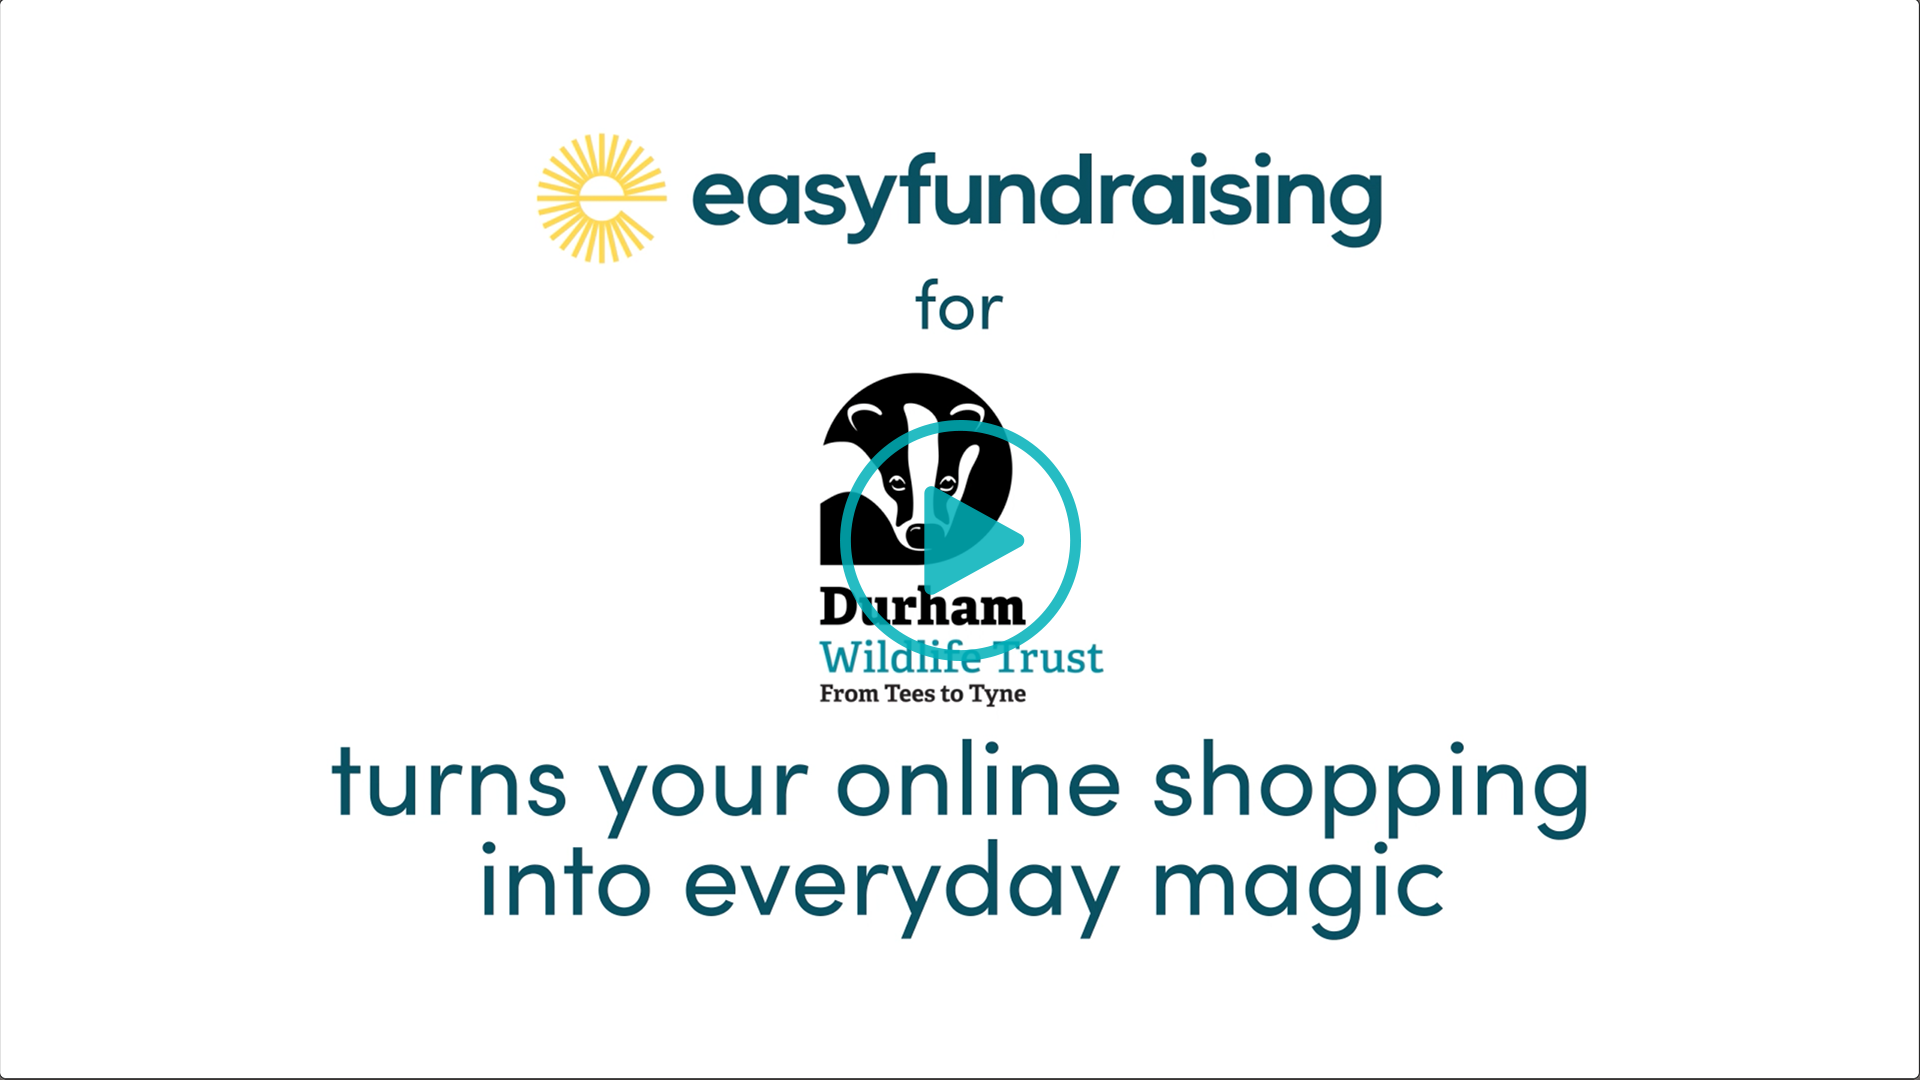 We turn your daily shopping into everyday magic